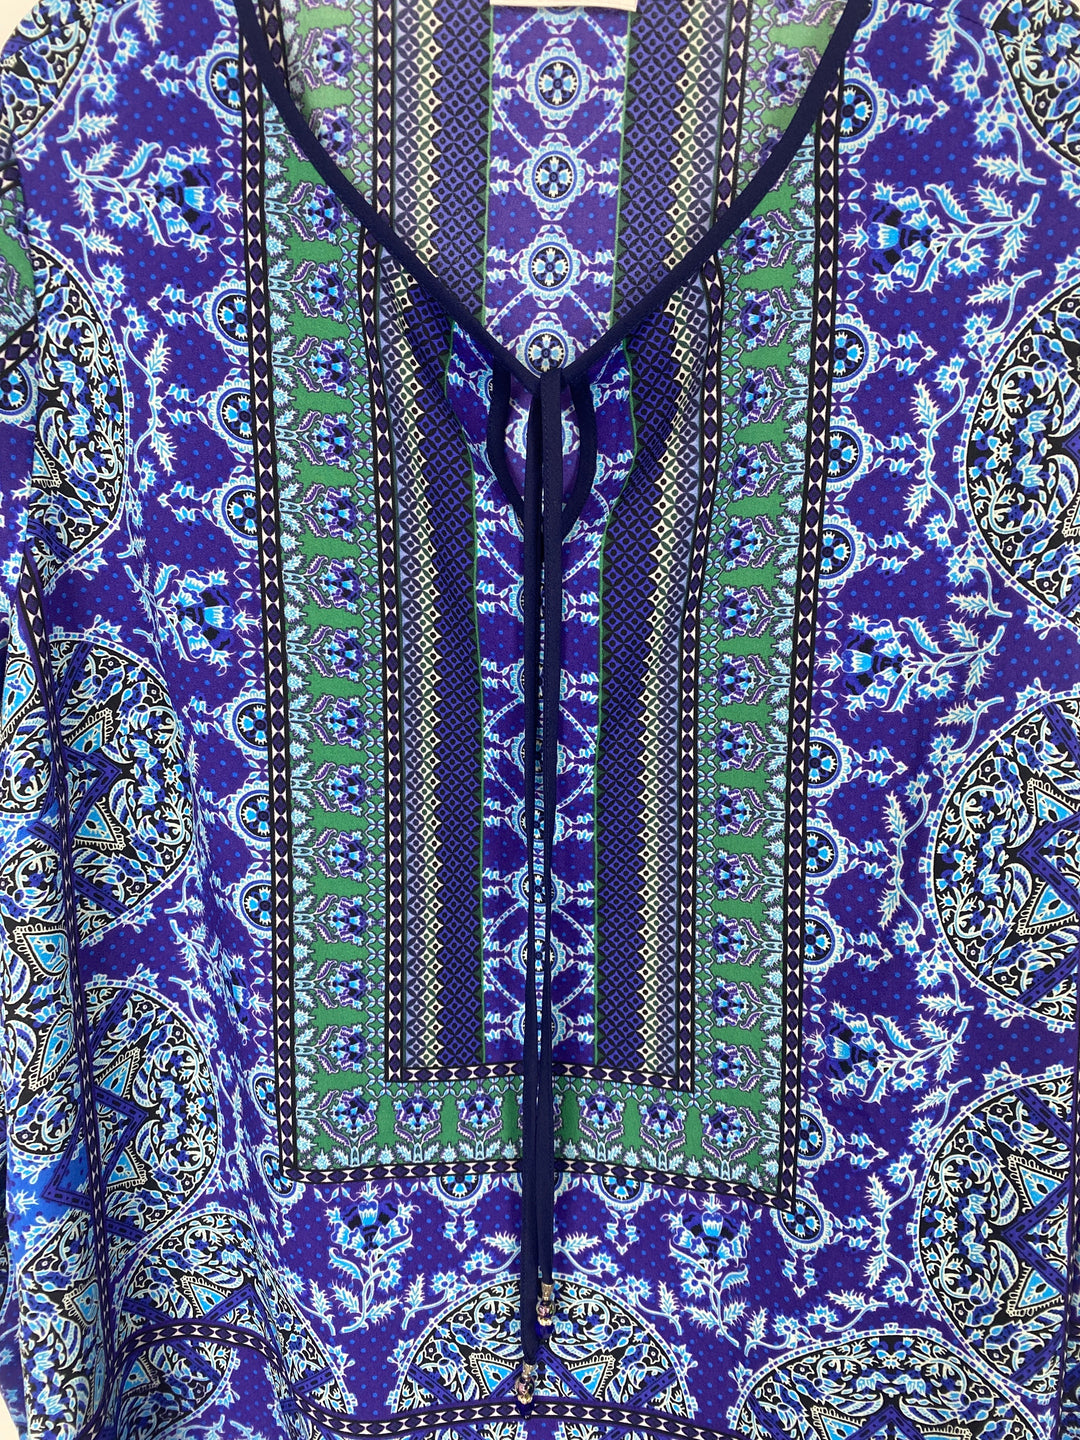 Purple, Green and Blue Abstract Printed Long Sleeve Top - Medium/Large